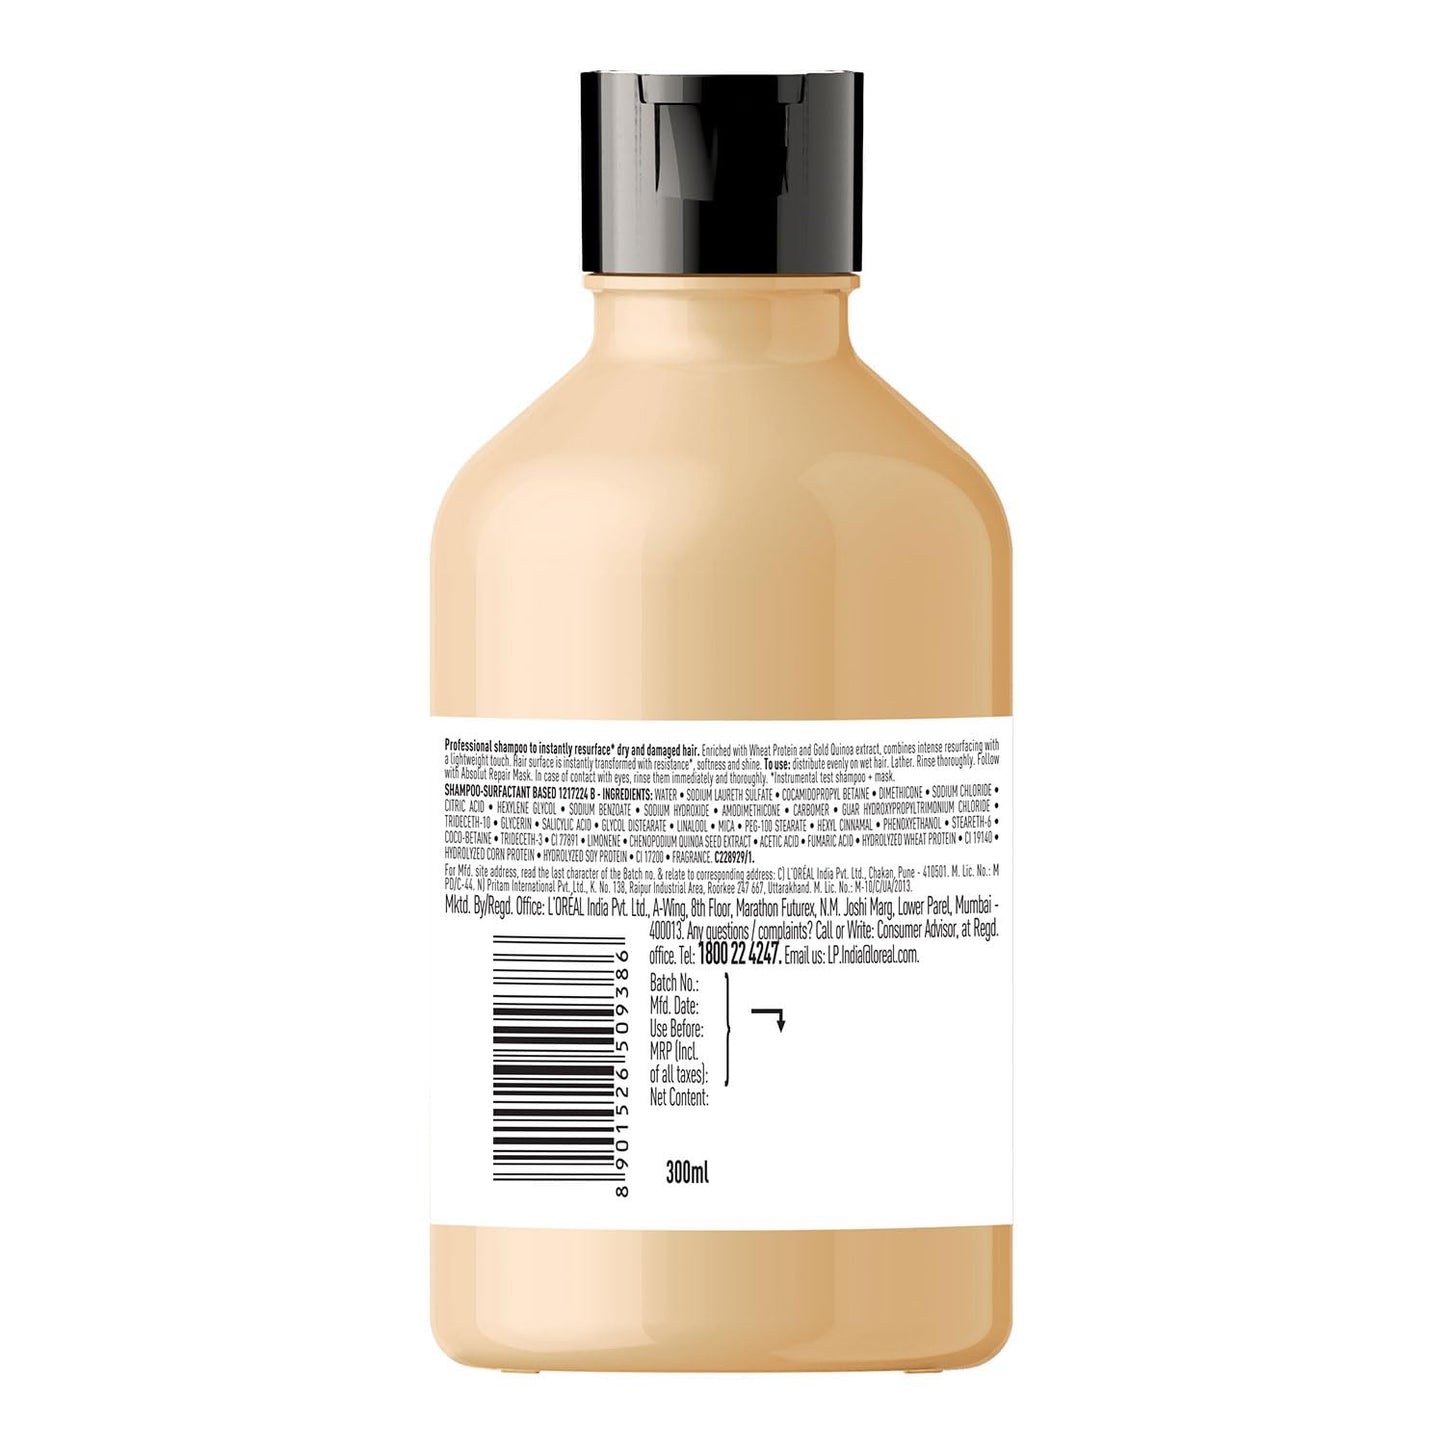 L'OREAL PROFESSIONNEL PARIS Absolut Repair Shampoo For Damaged & Weakend Hair, 300ML |Professional Hair Repairing Shampoo|Hair Strengthening Shampoo Shampoo from loreal pro paris